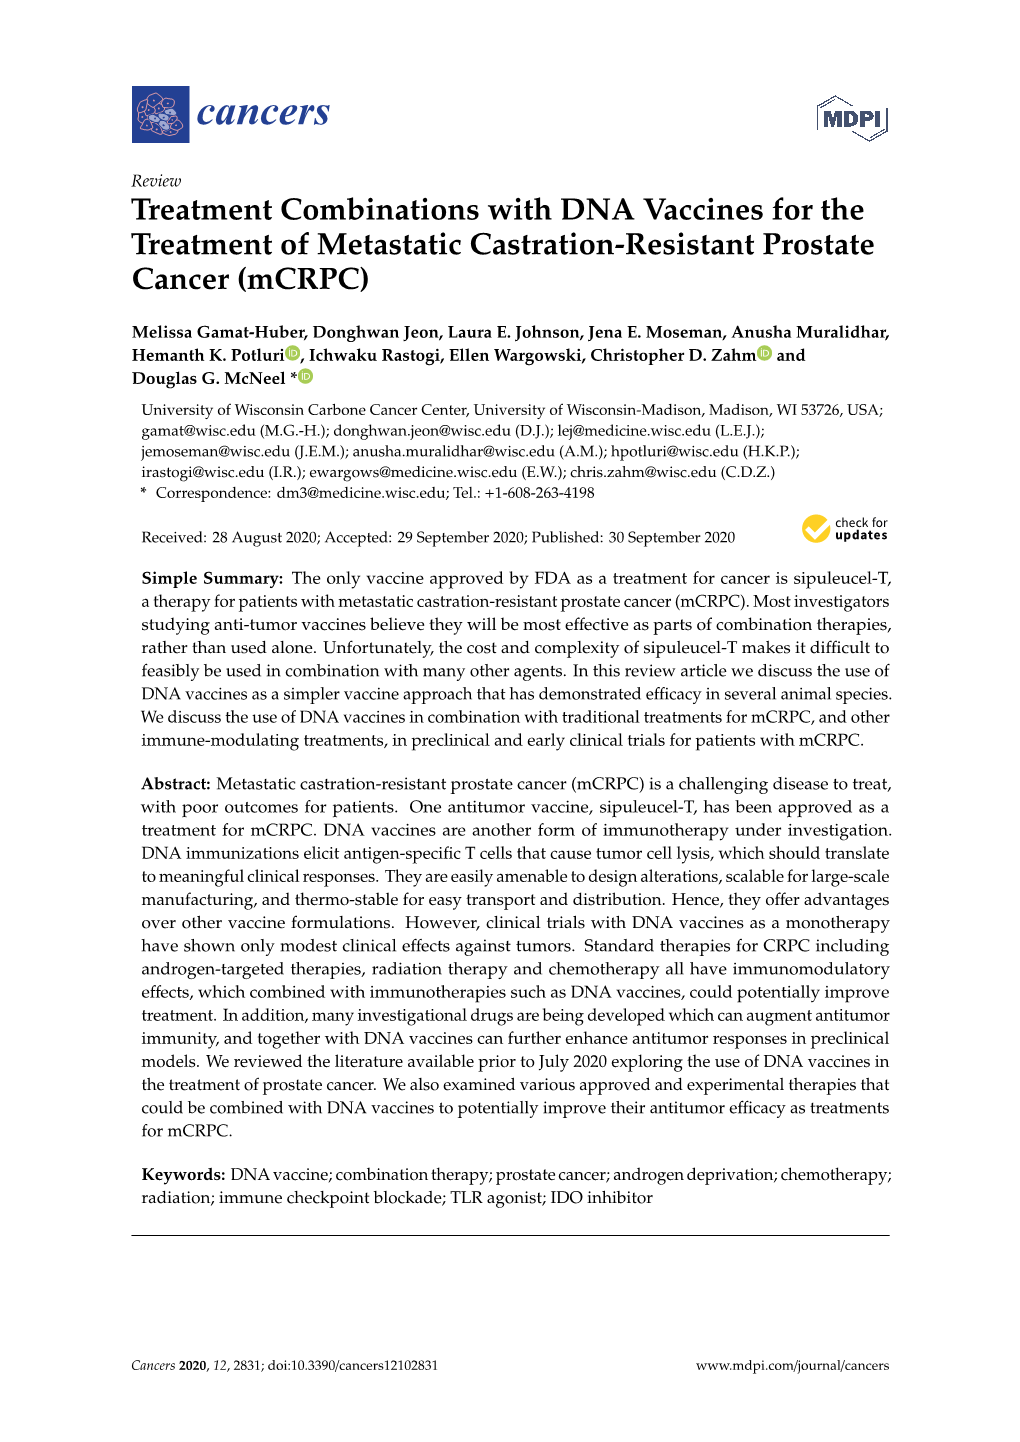 Treatment Combinations with DNA Vaccines for the Treatment of Metastatic Castration-Resistant Prostate Cancer (Mcrpc)